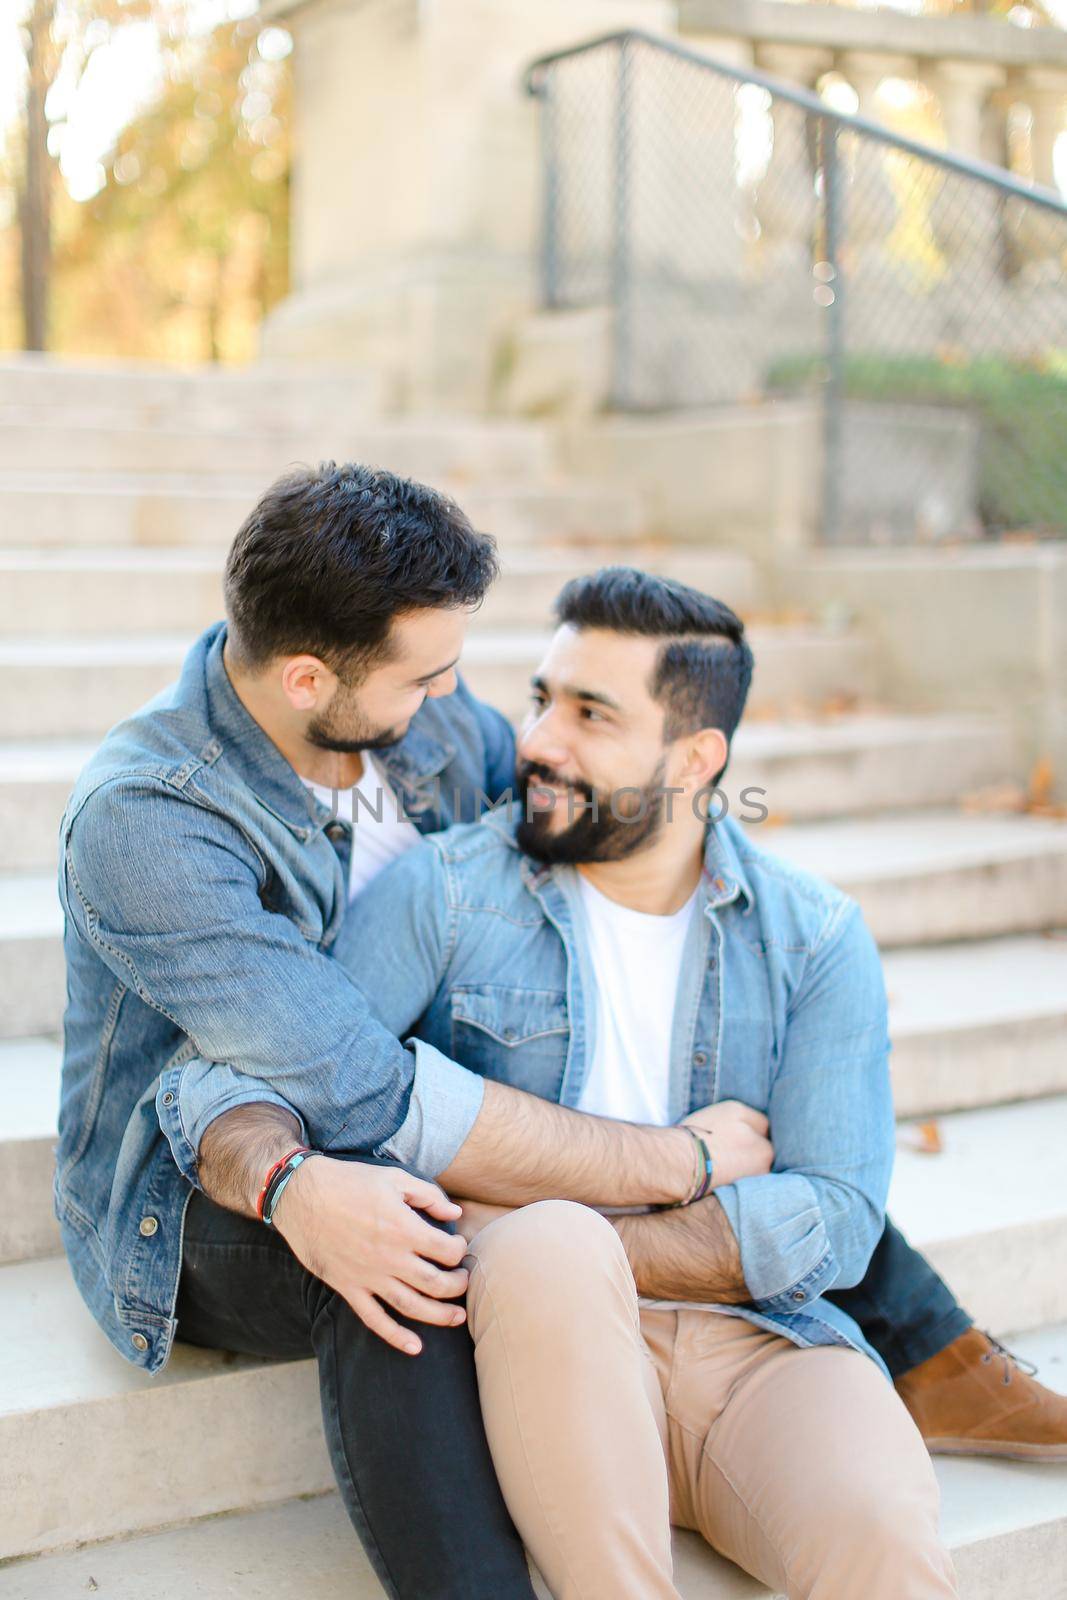 Caucasian european young gays sitting on concrete stairs and hugging, wearing jeans shirts. Concept of same sex couple and lgbt.